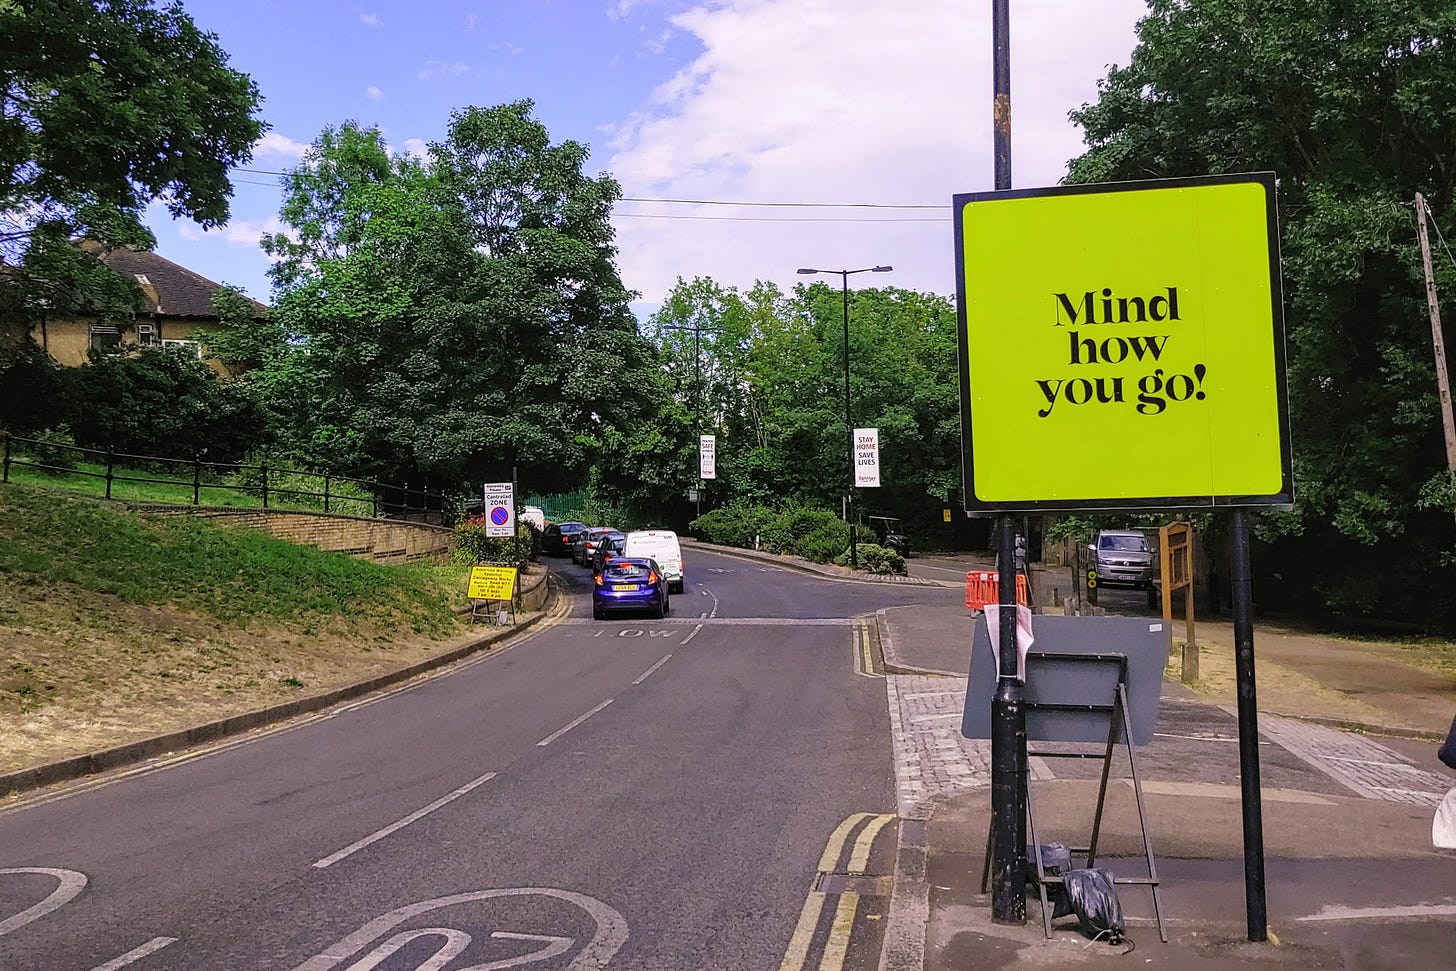 A roadsign reads, "Mind how you go!"